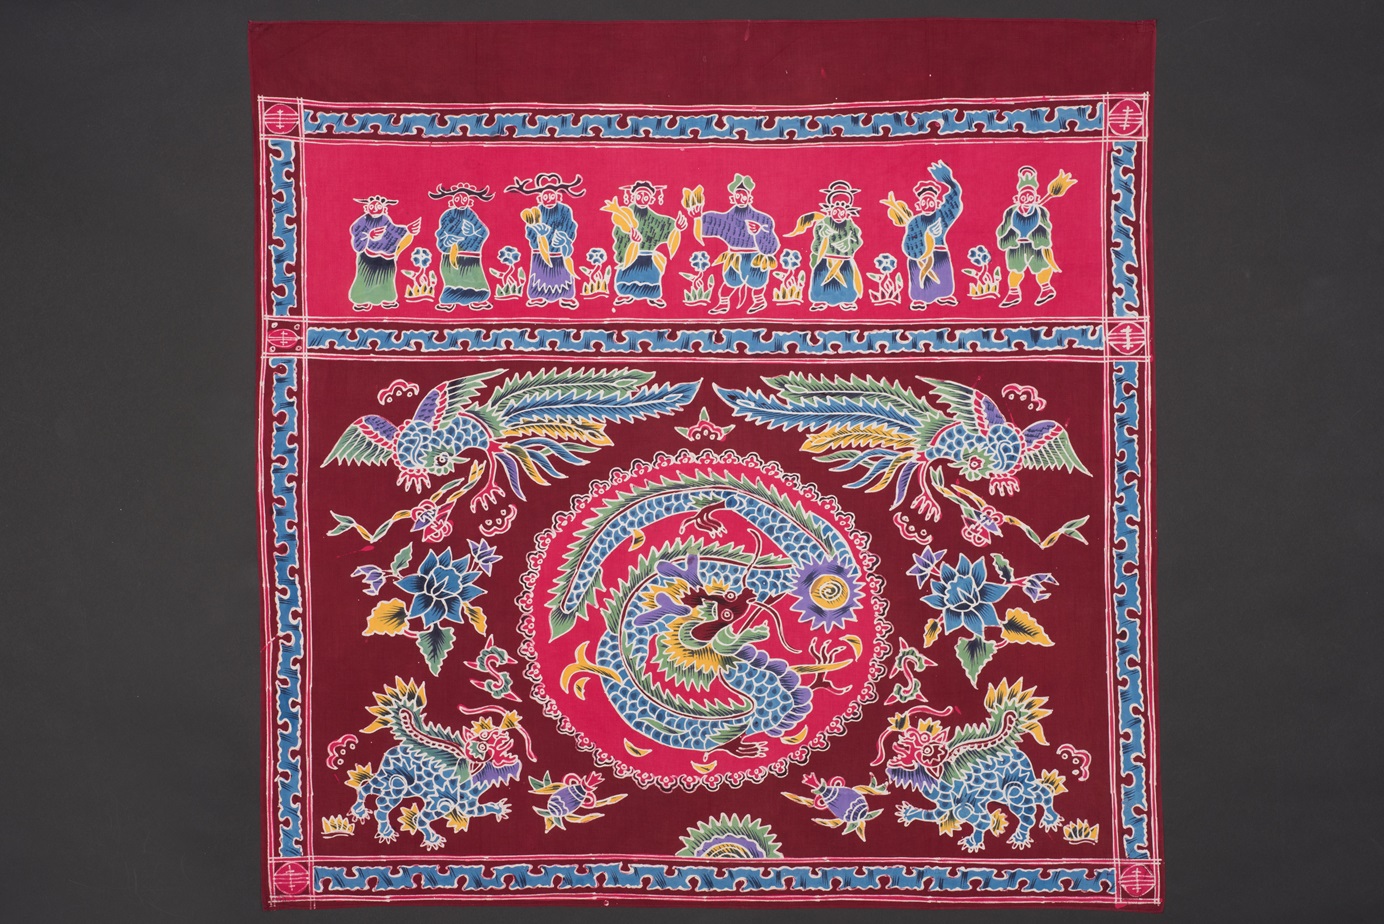 Public Lecture - Auspicious Design and Hidden Meanings in Peranakan Altar Cloths